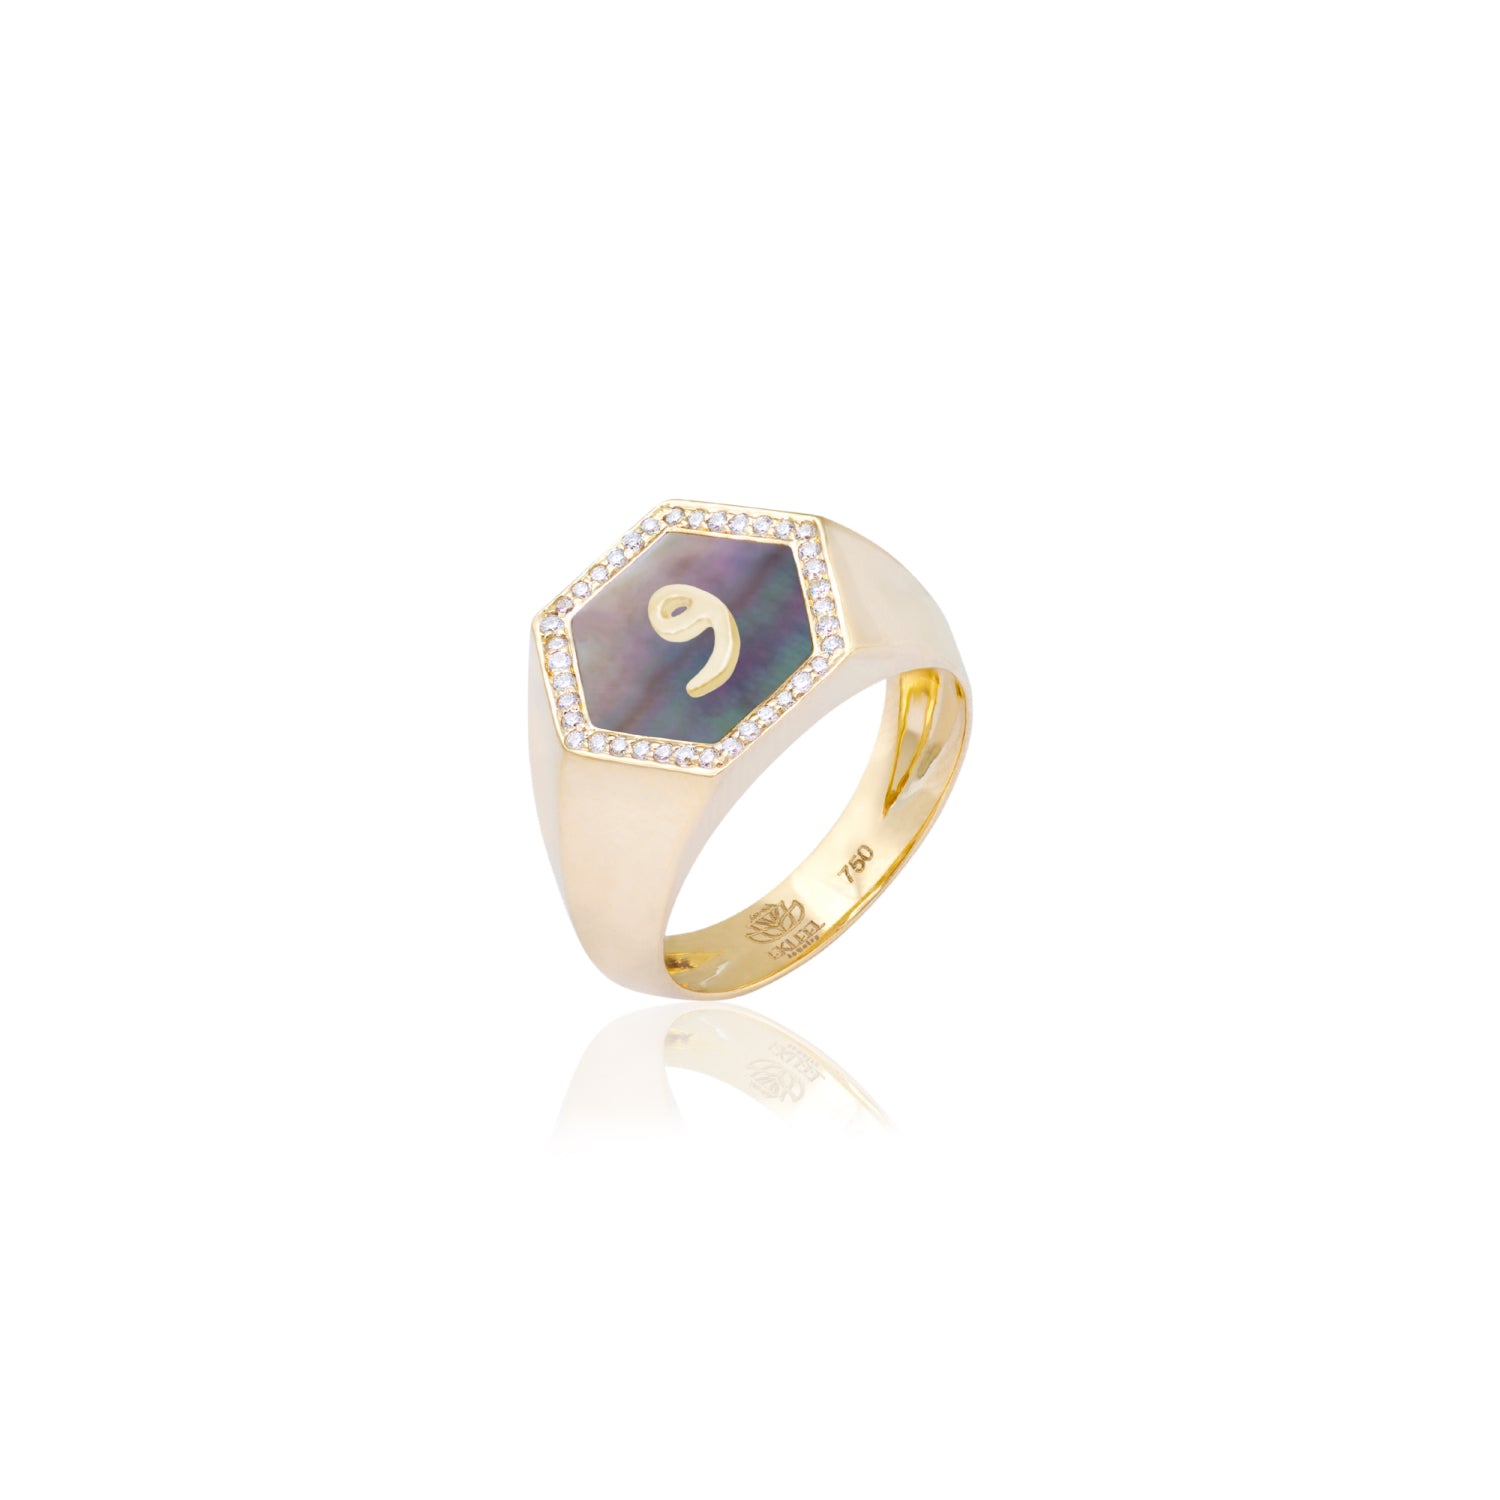 Qamoos 2.0 Letter و Black Mother of Pearl and Diamond Signet Ring in Yellow Gold